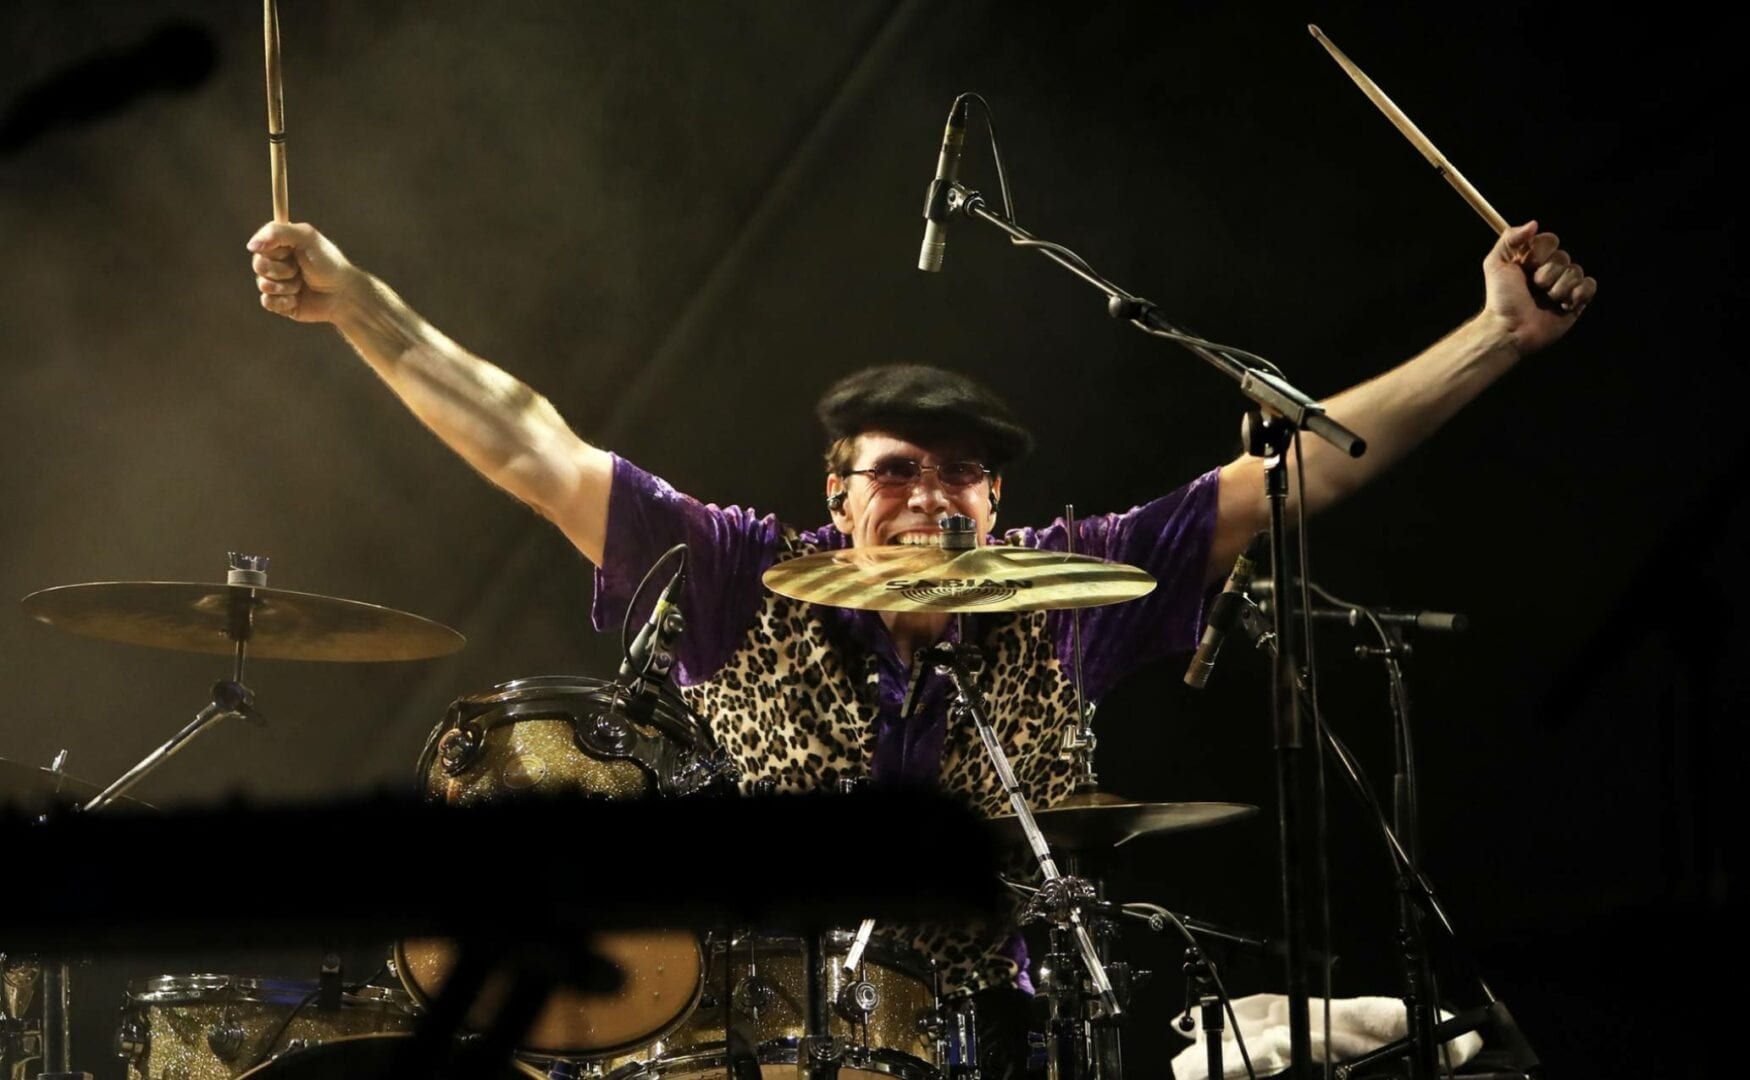 A man with his arms up playing drums